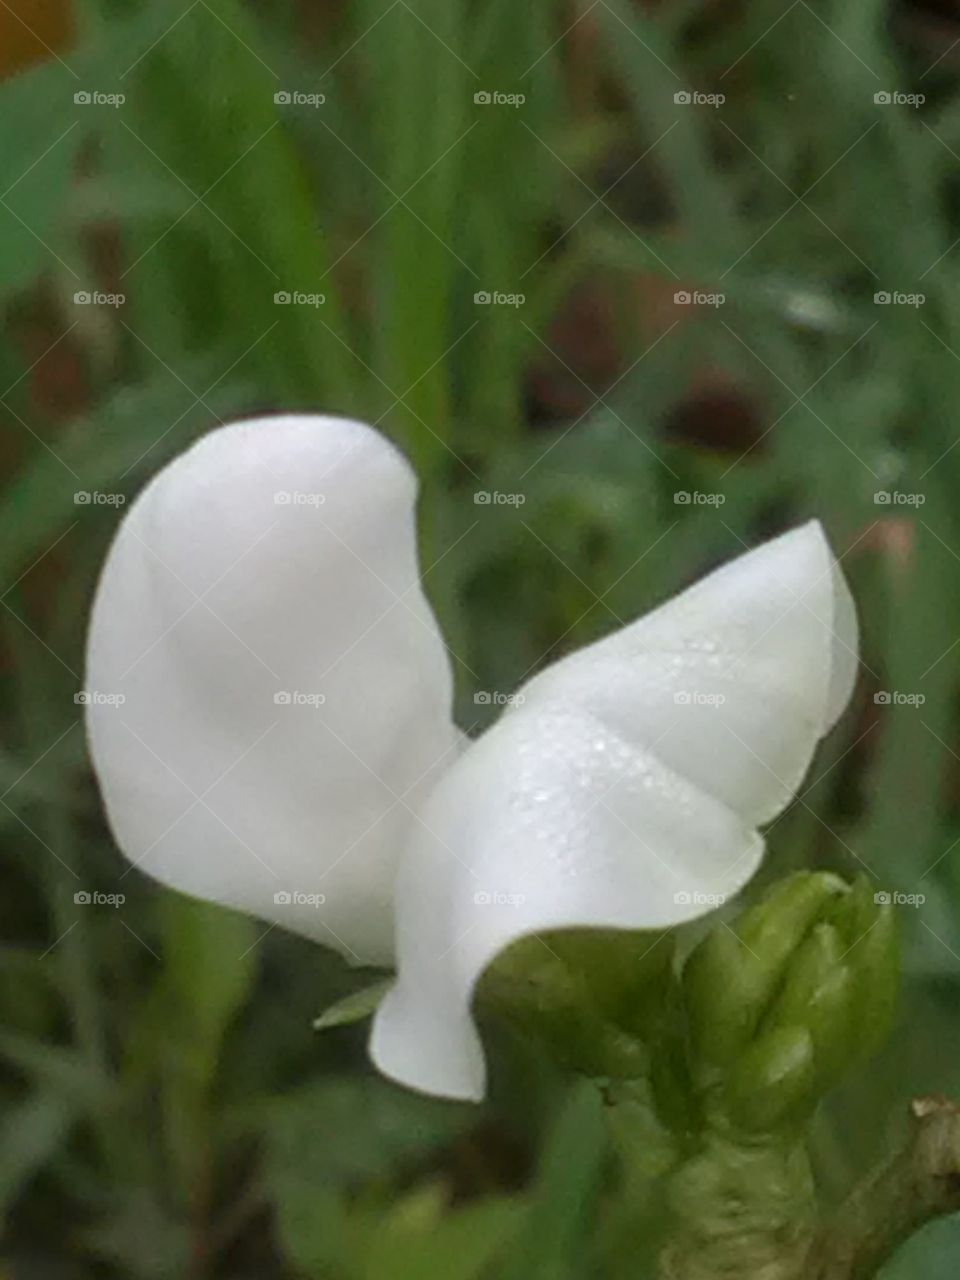 This is a very beautiful flower white smoothly flower.